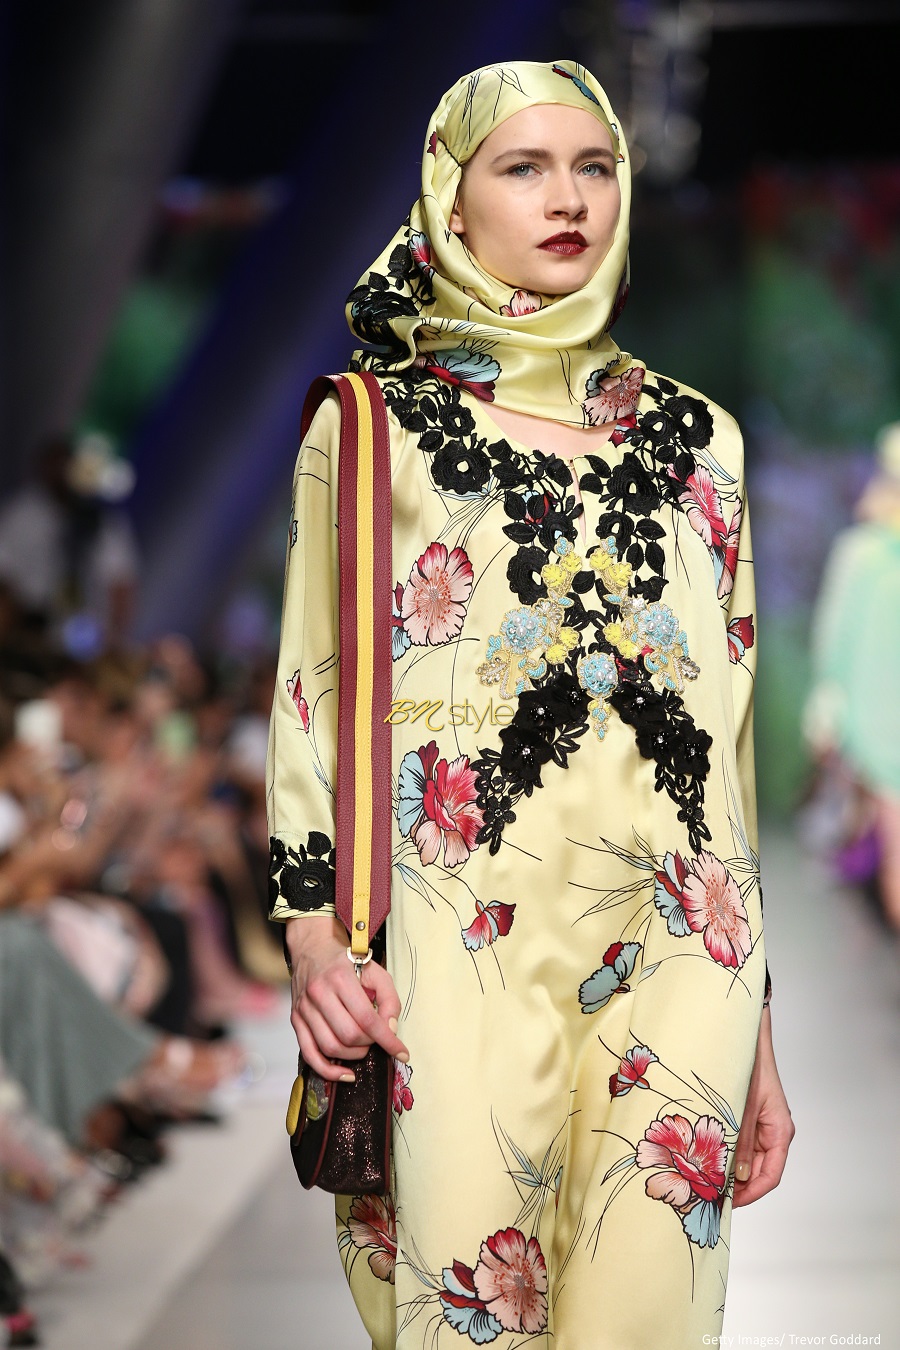 Saudi Arabia holds First Ever Arab Fashion Week – with No Photographers or Men Allowed